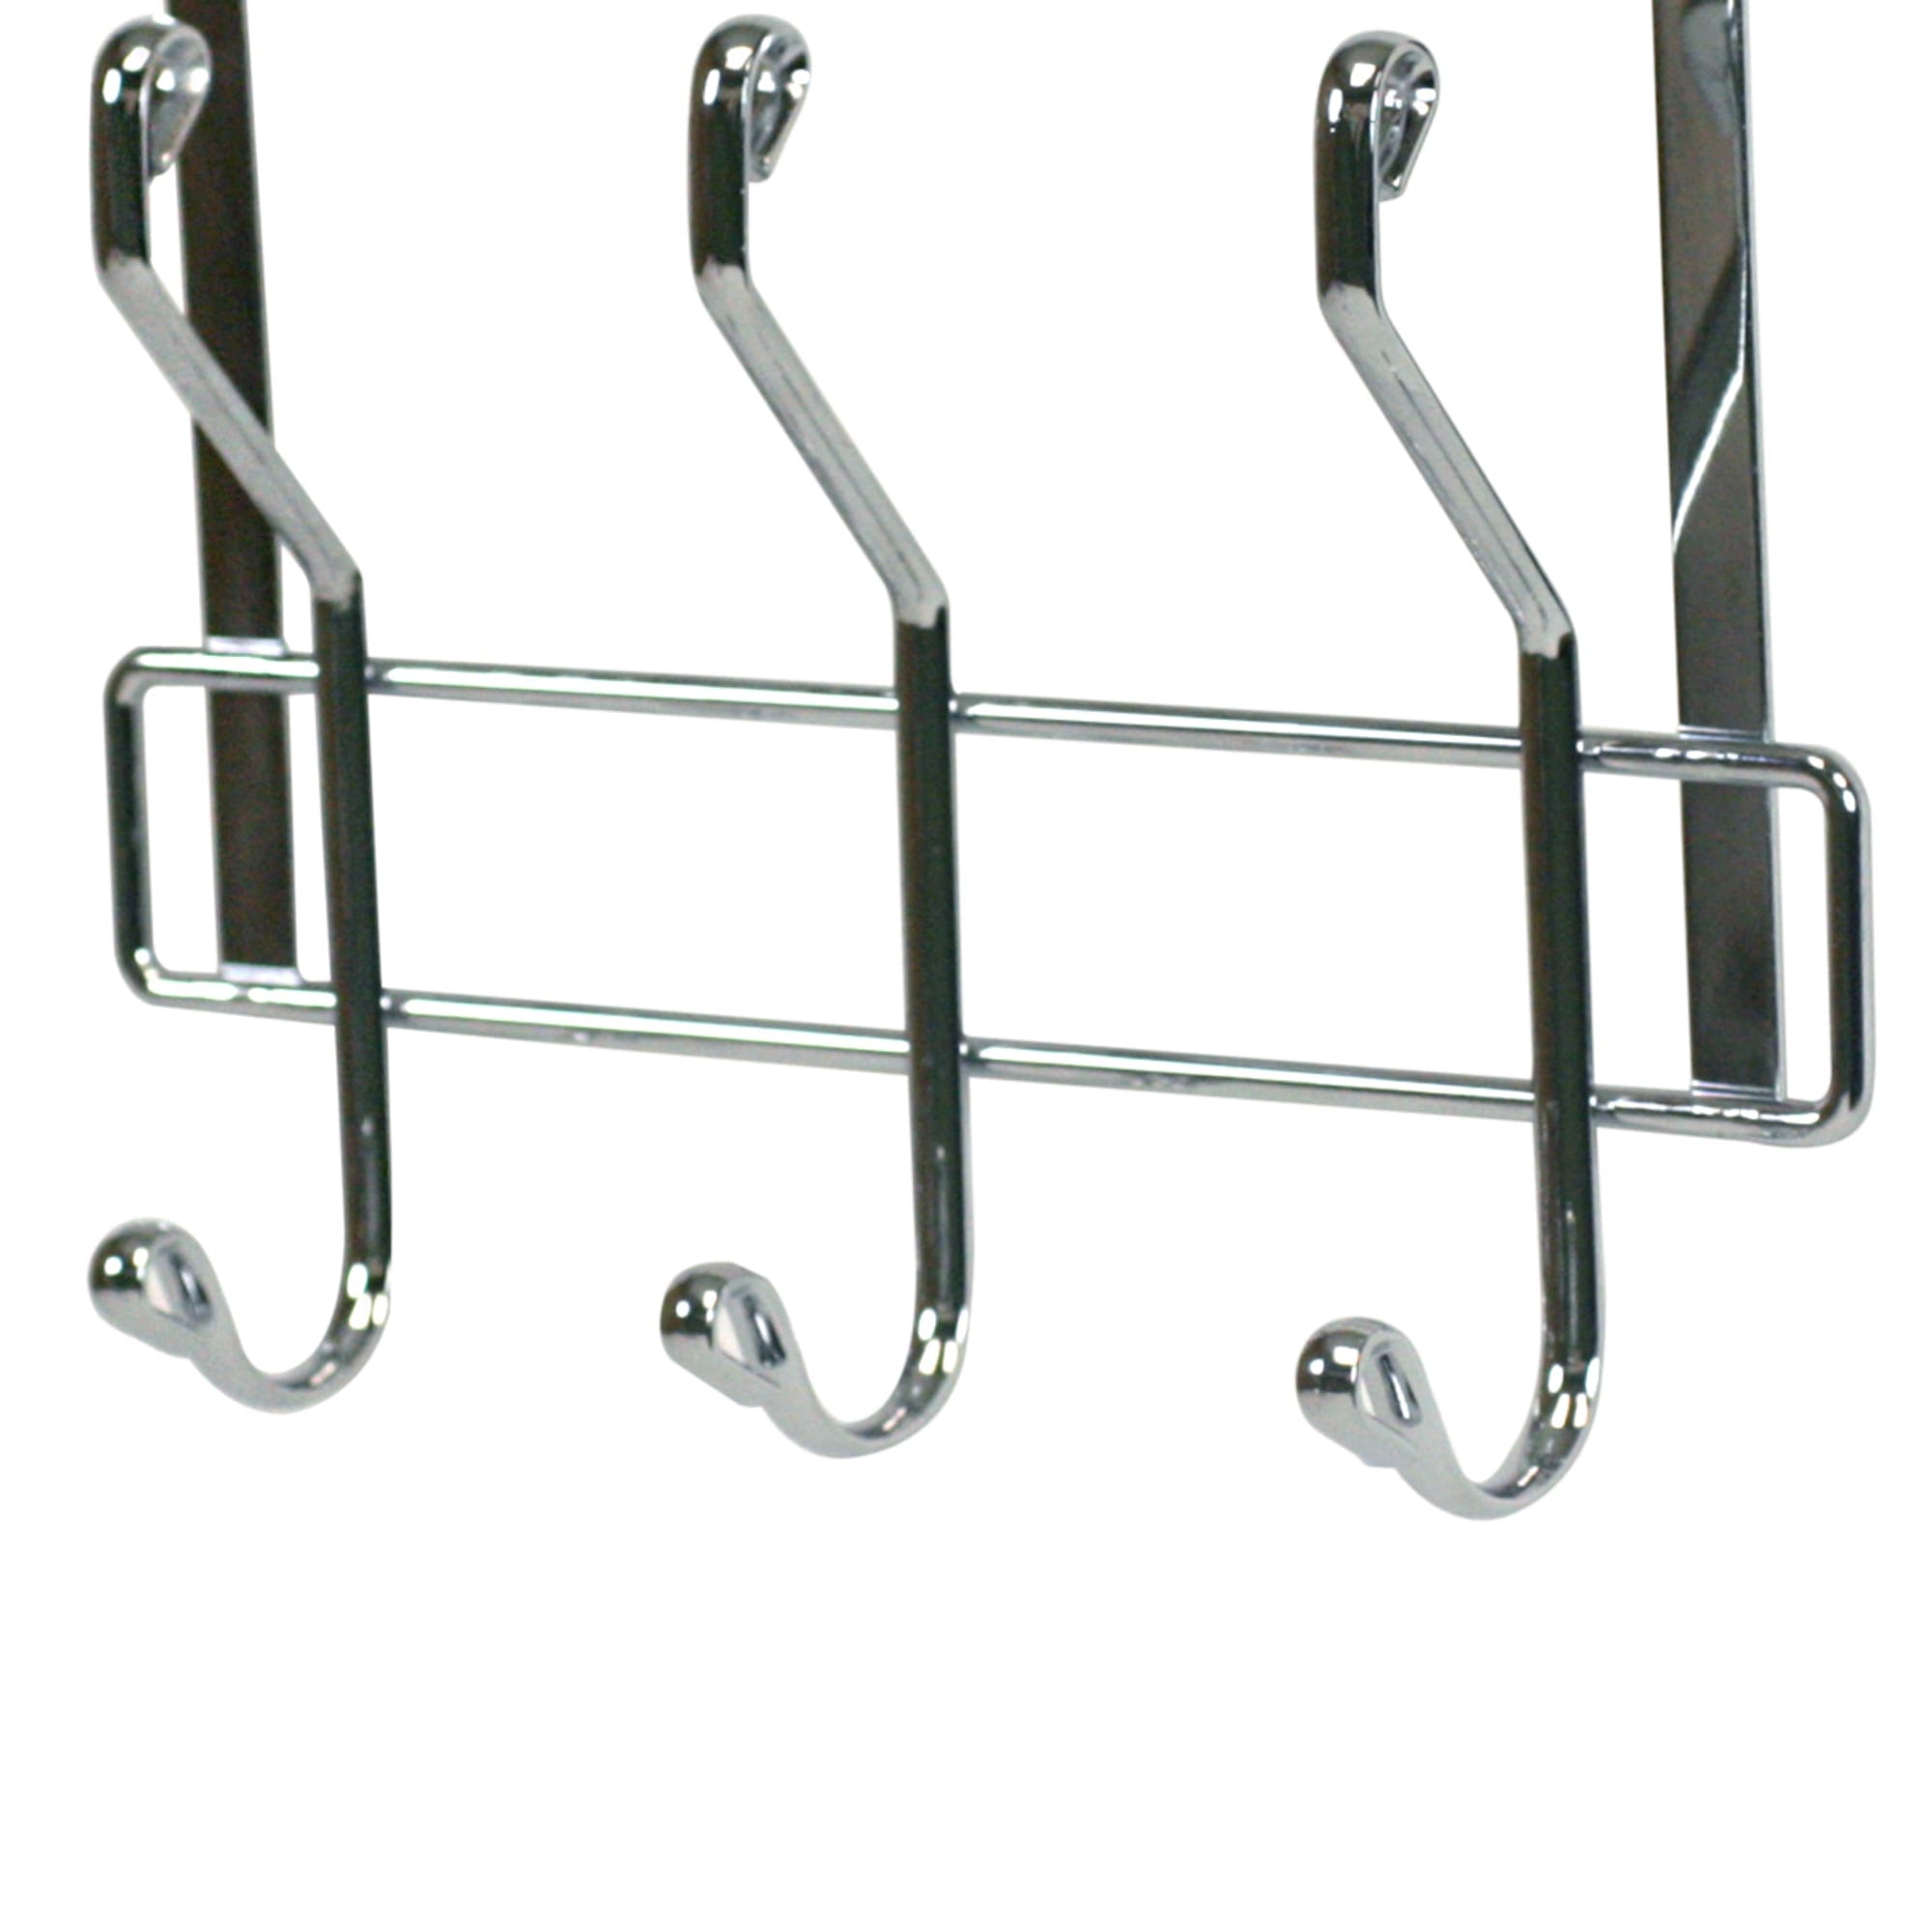 Home Basics 3 Dual Hook Over the Door Steel Hanging Organizing Rack, Chrome $5.00 EACH, CASE PACK OF 24